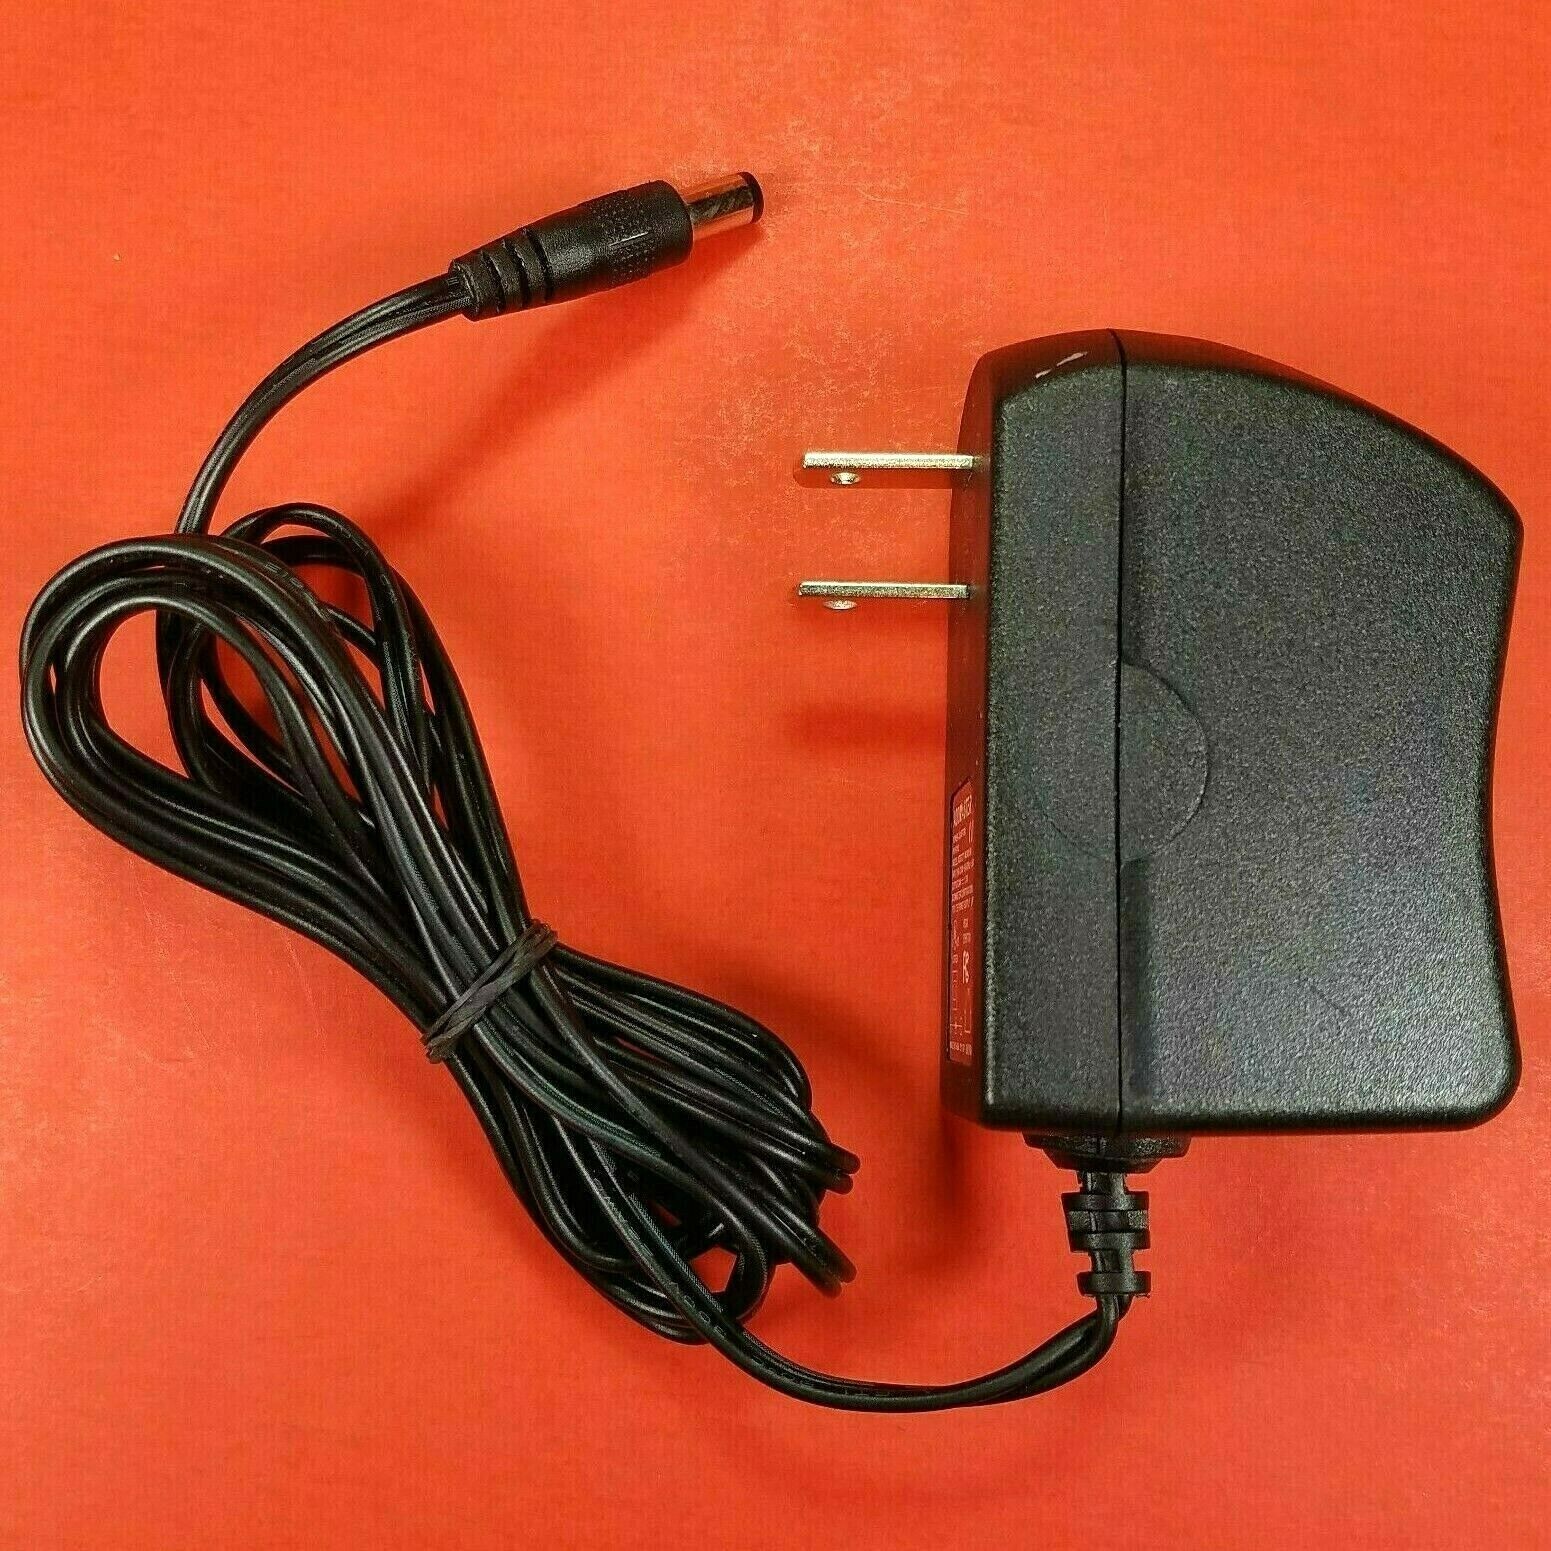 AC Adapter Power Supply Cord Charger for Fluke 43 43B Quality Analyzer Brand Unbranded Type AC/Standard MPN Deos